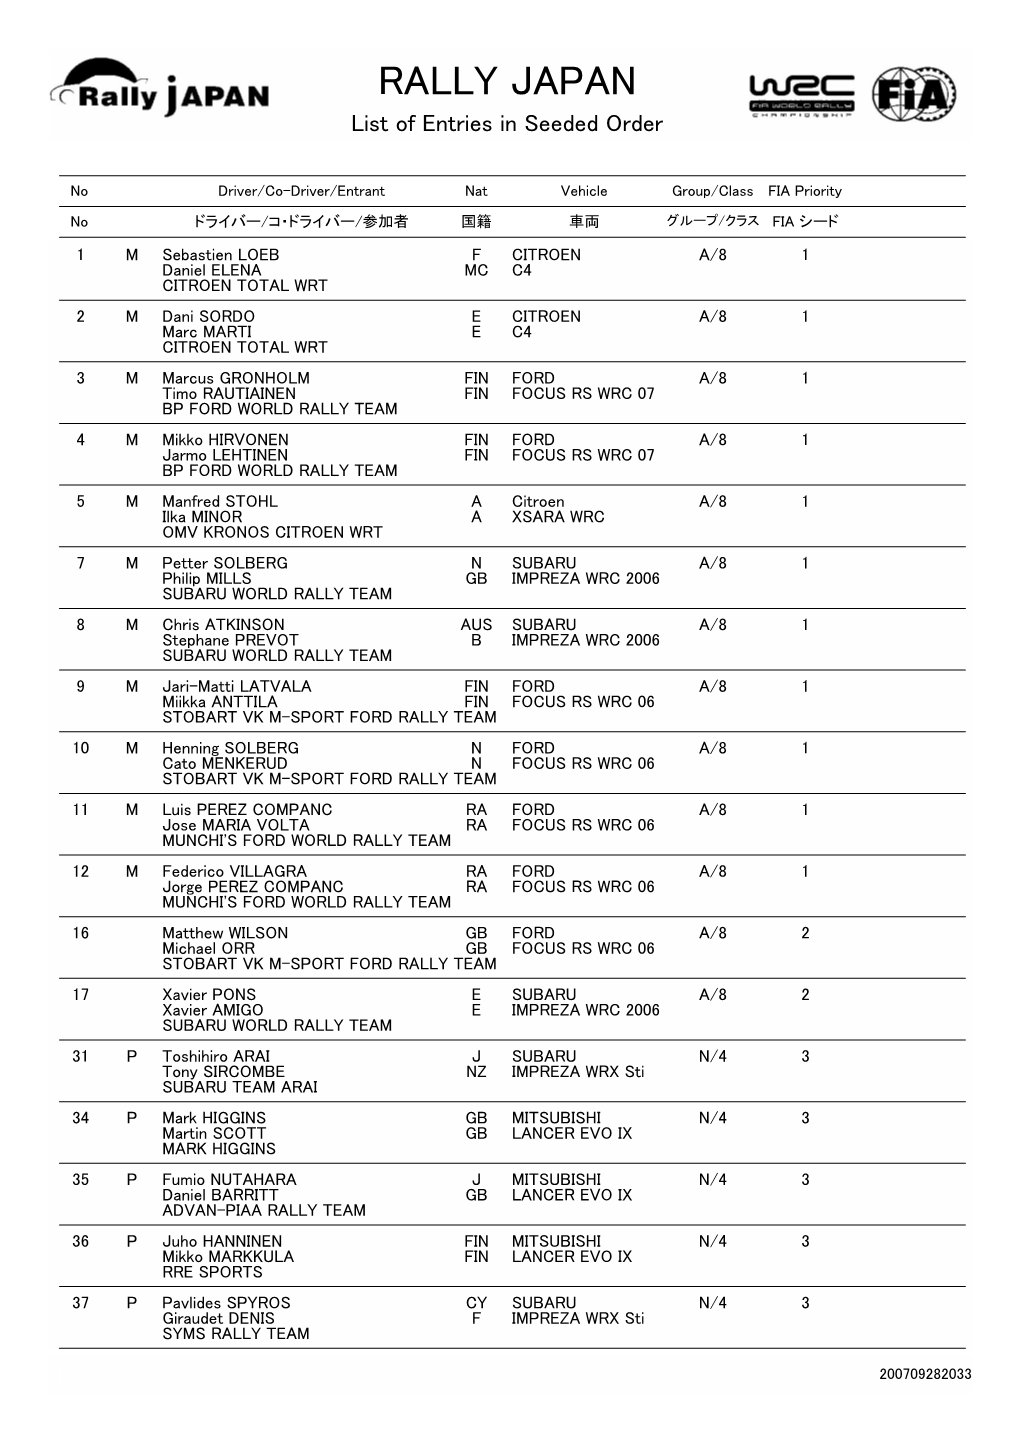 RALLY JAPAN List of Entries in Seeded Order